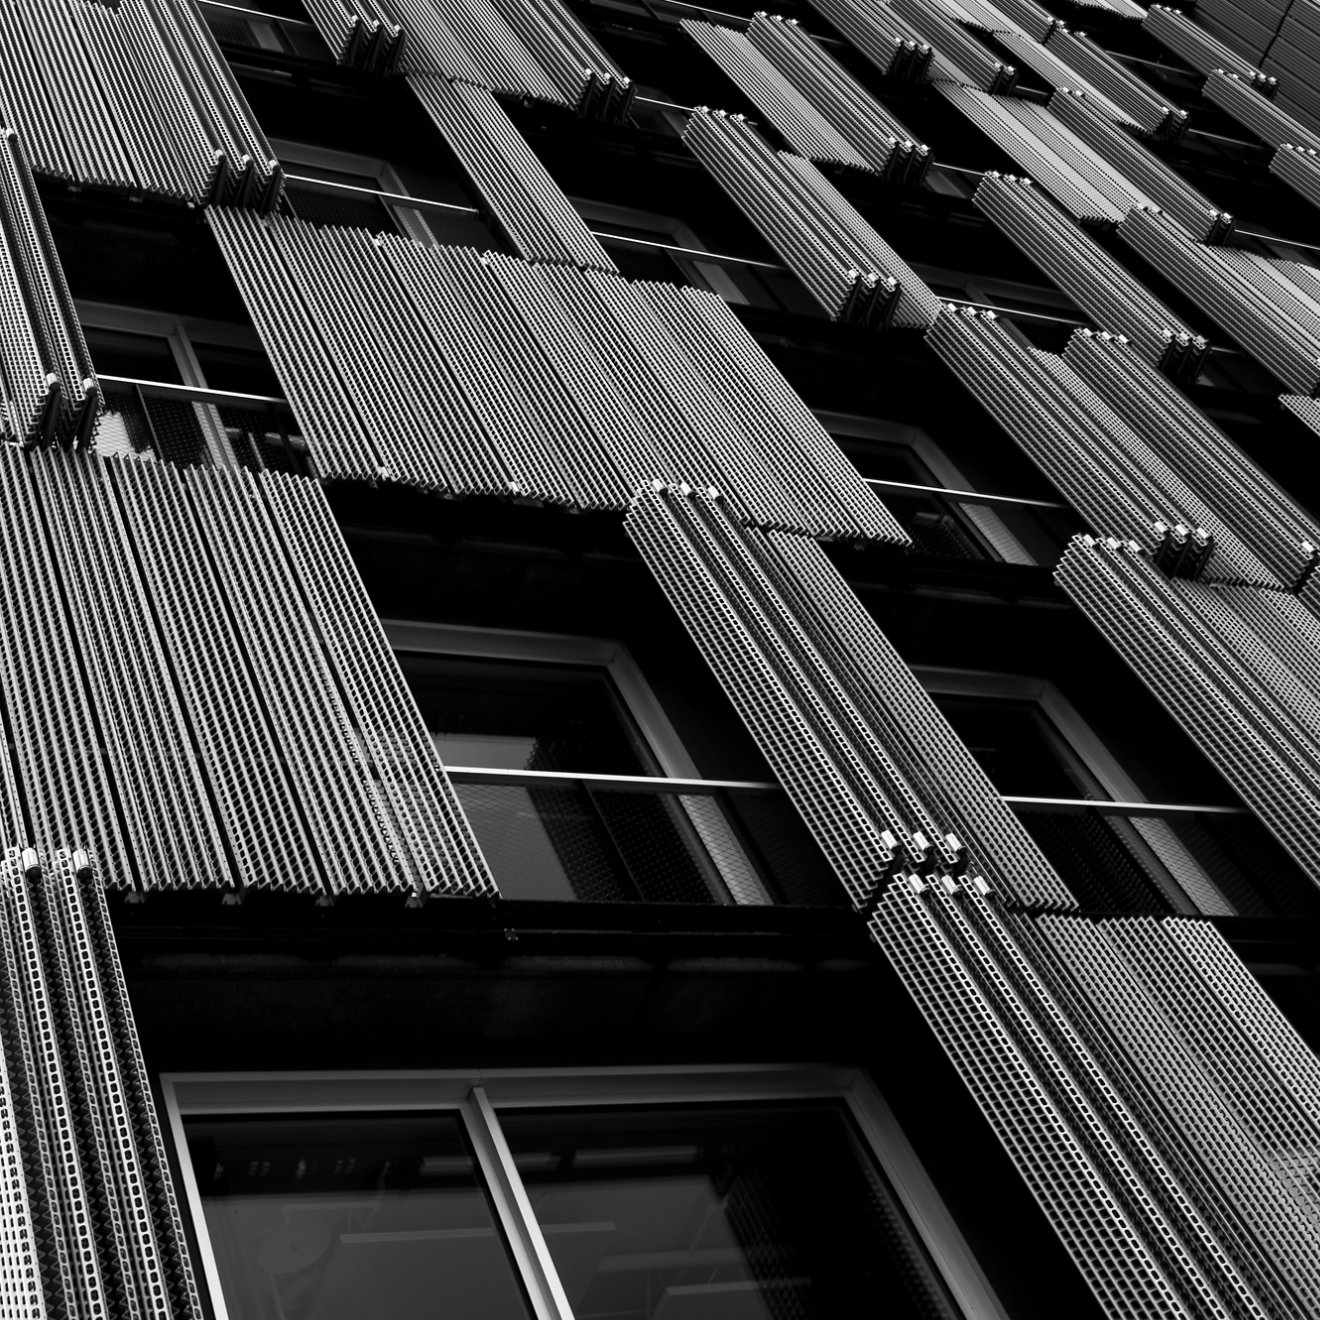 A black and white closeup of windows and cladding on a building